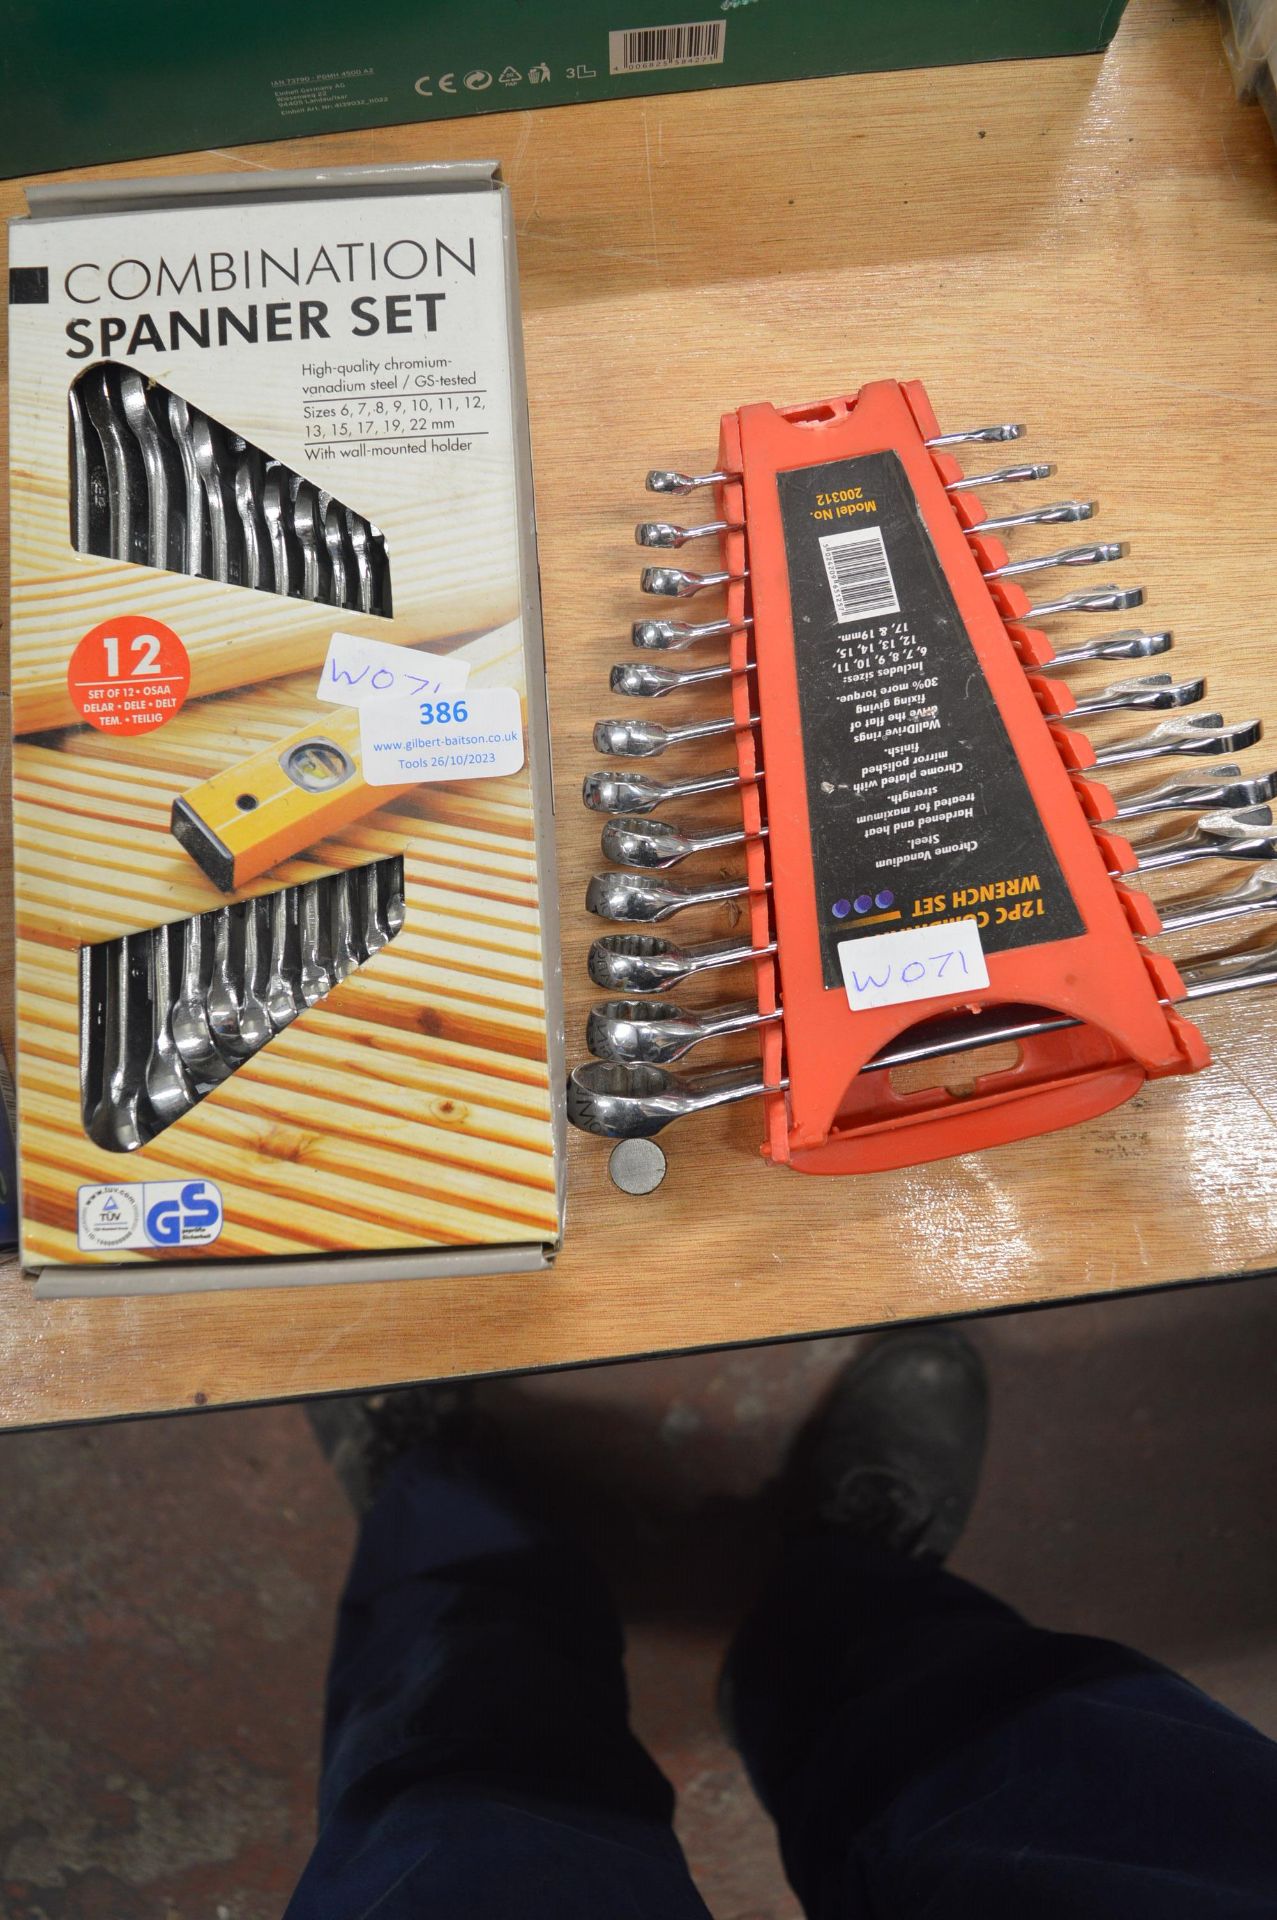 Two Combination Spanner Sets